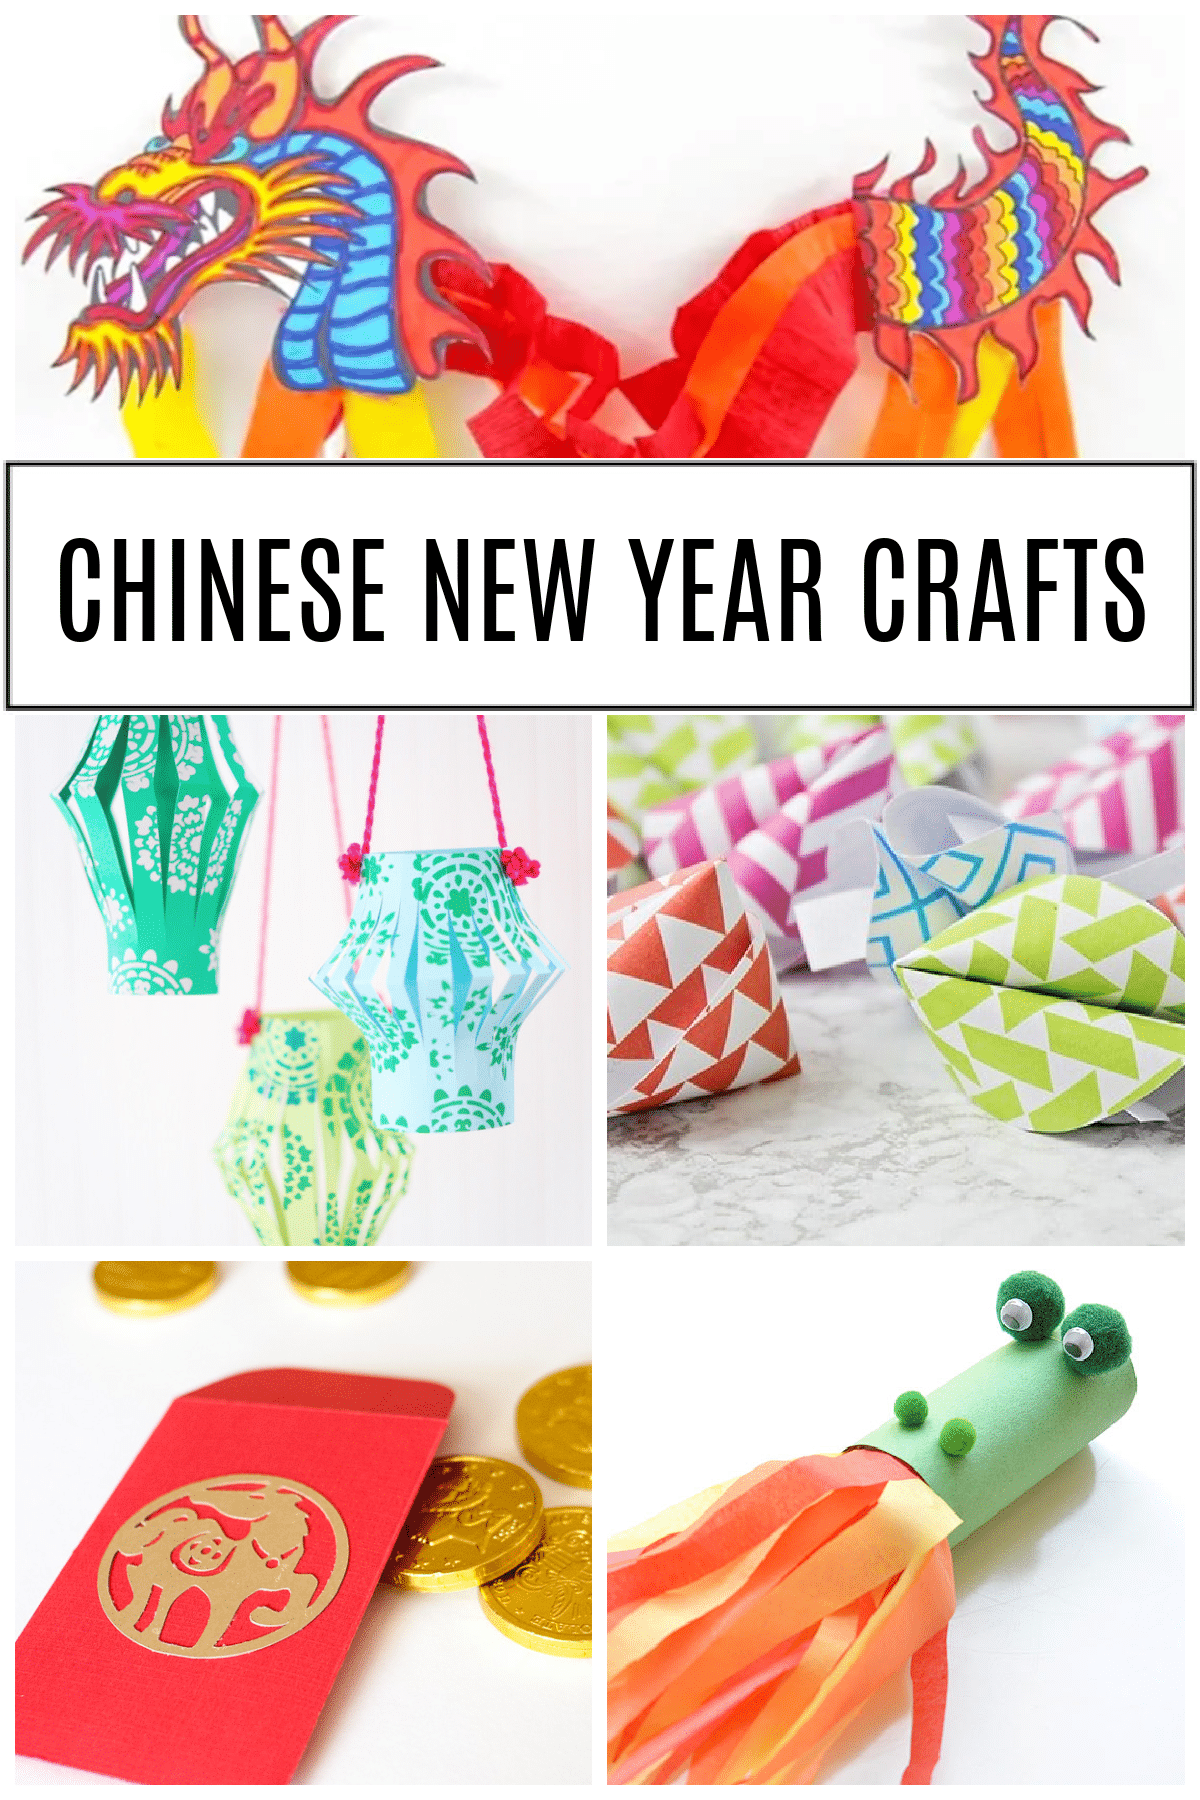 Kick-off your Spring Festival celebrations with over 50 creative Chinese New Year crafts for kids! Printables, projects, books, and activities with lanterns, drums, dragons, and more! via @somewhatsimple